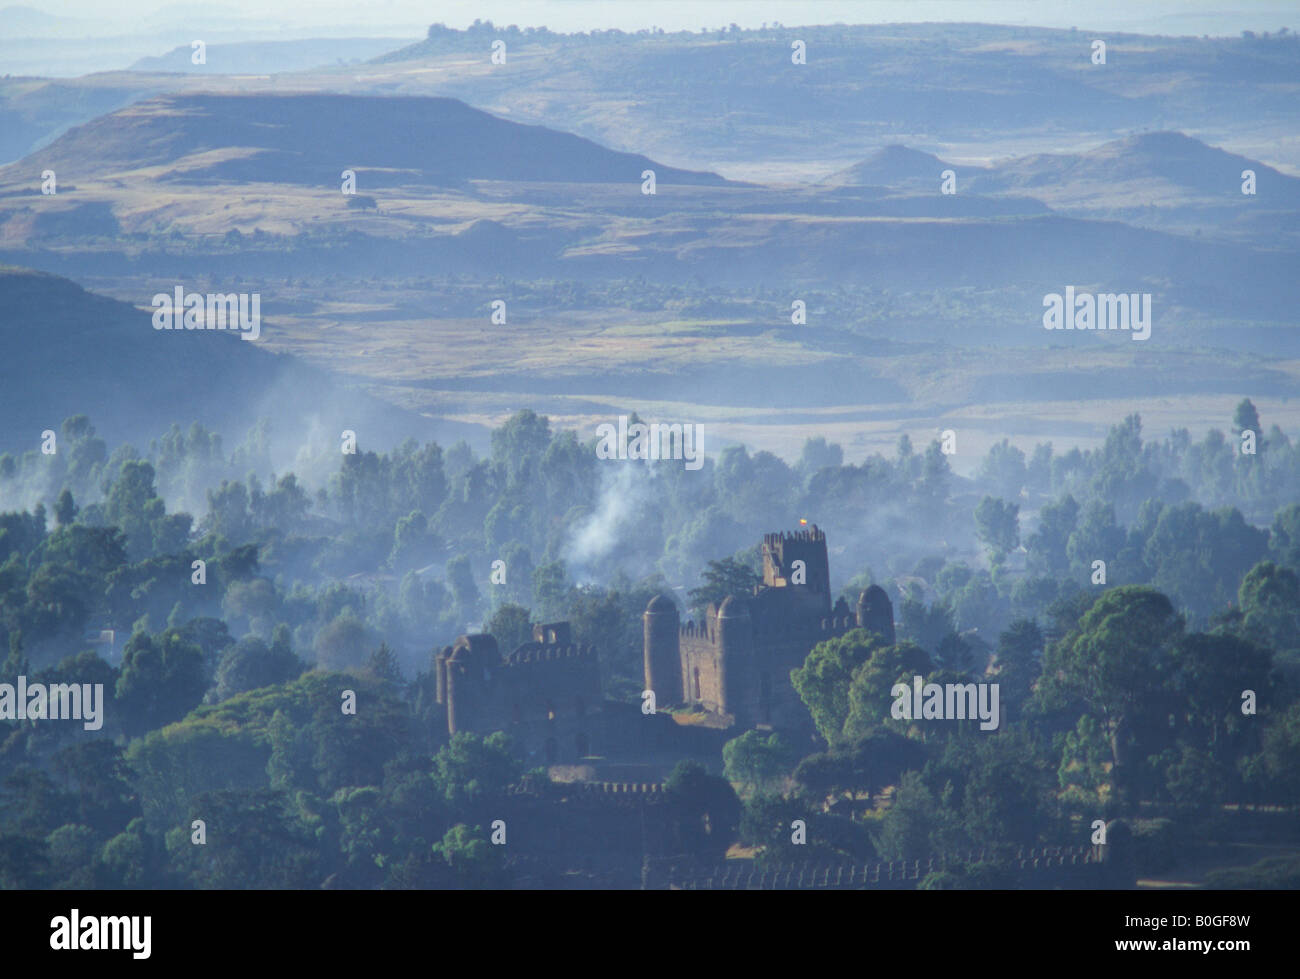 King Fasil's castle and surrounding hills and woods at dawn, Gonder, Ethiopia. Stock Photo